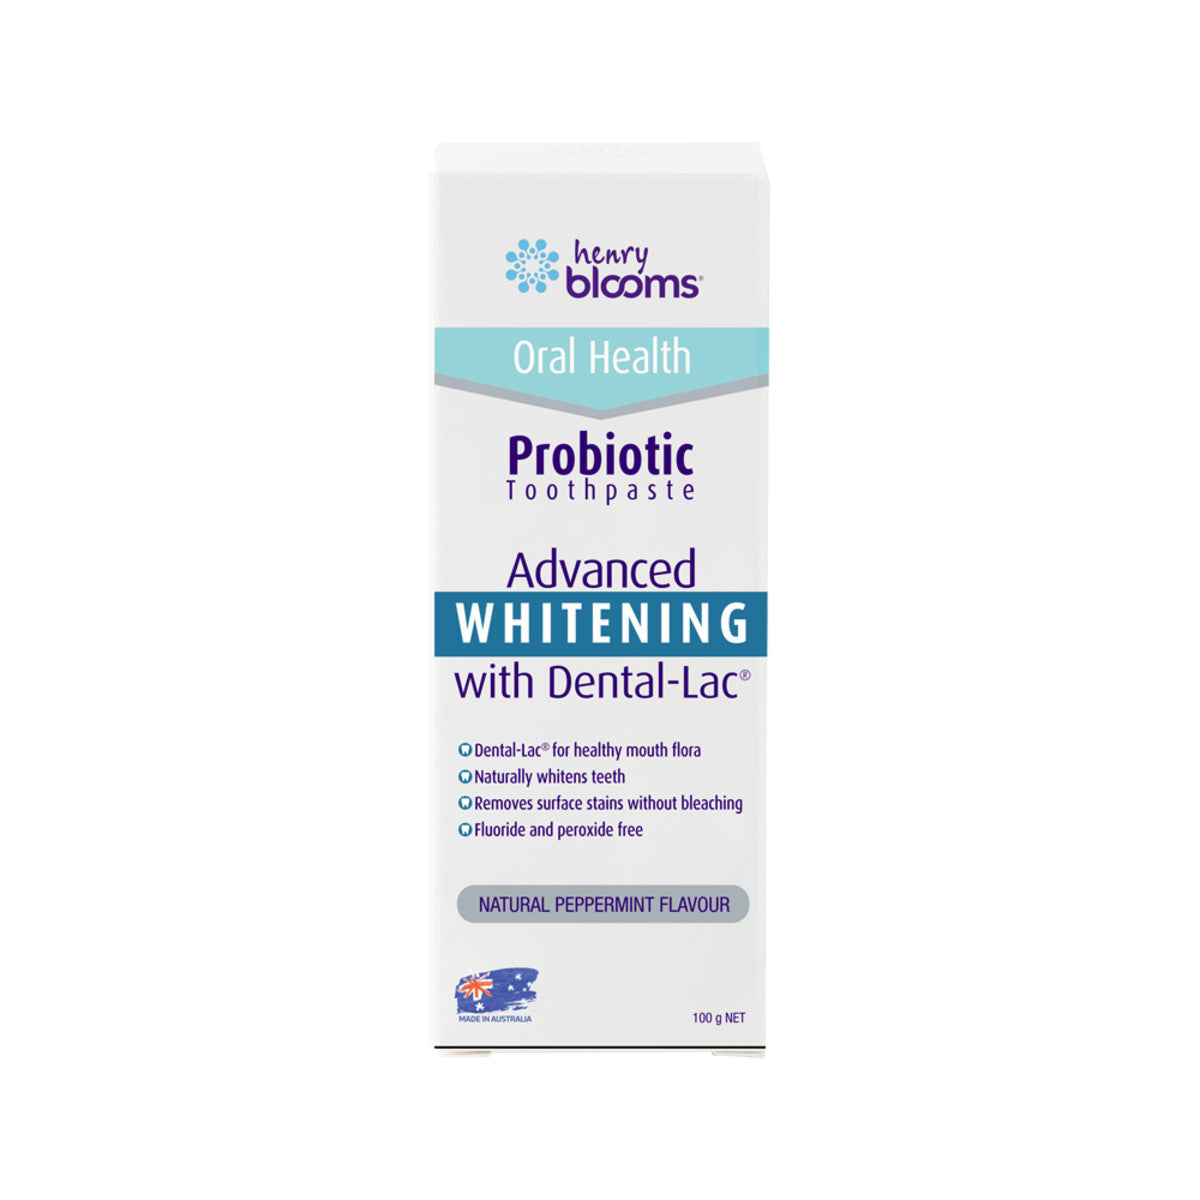 Henry Blooms - Probiotic Toothpaste Advanced Whitening Peppermint with Dental-Lac Peppermint